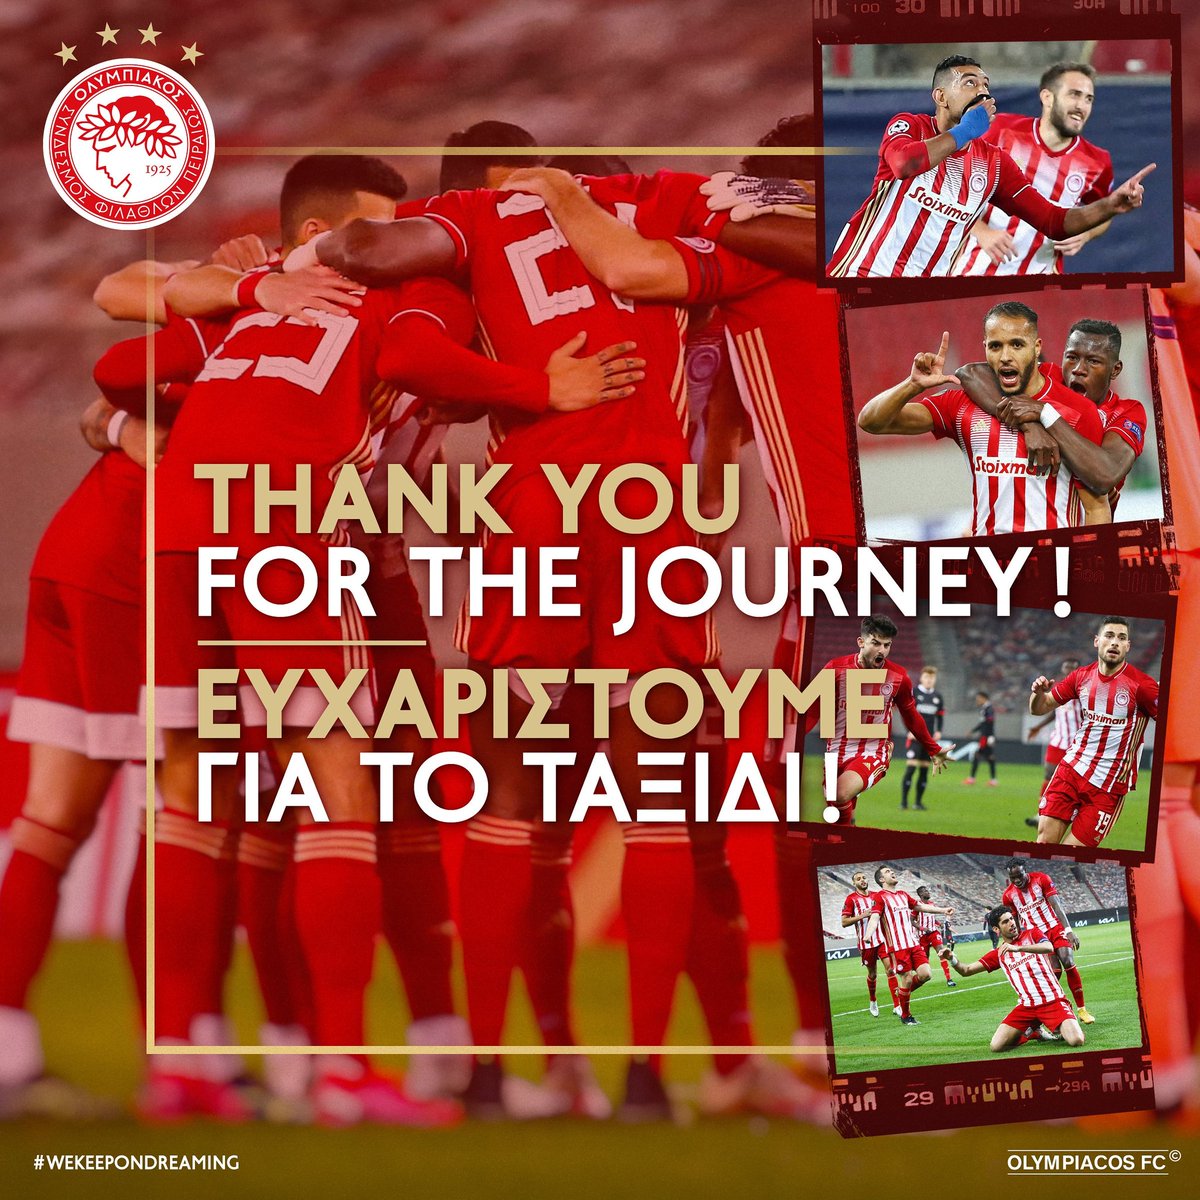 Our European journey this season has concluded. Thank you for all the legendary moments we lived for yet another season! We Keep On Dreaming! 🔴⚪🇬🇷 #Olympiacos #Football #WeKeepOnDreaming #Family #UEL #UCL #Europe #Greece #Piraeus